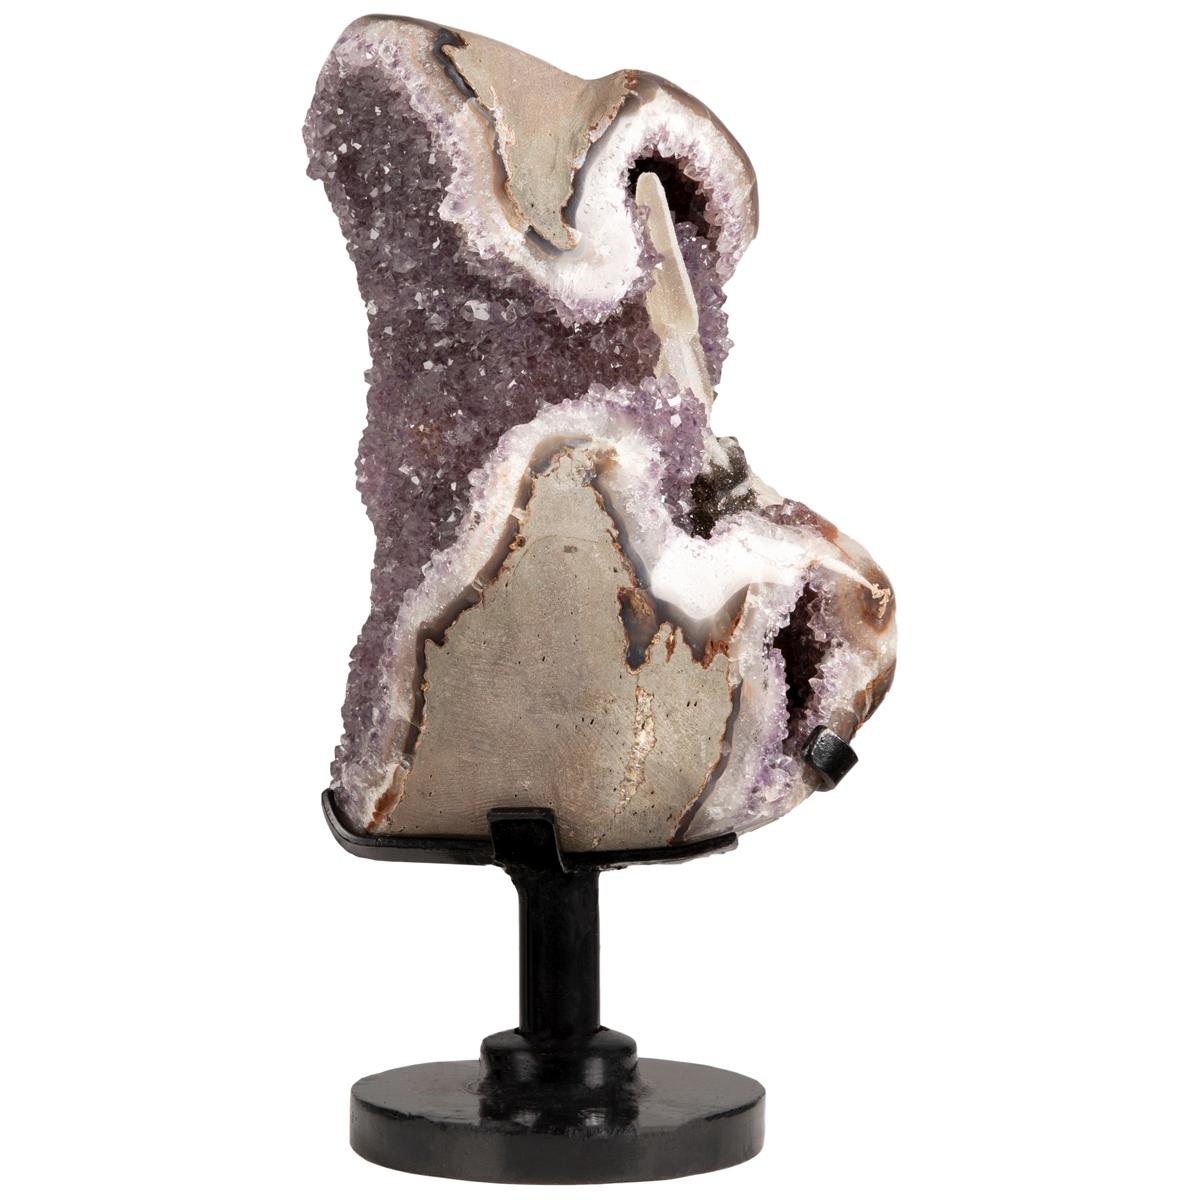 Sculptural Geode Heart with Amethyst and Druze, Agate, White Quartz and Calcite For Sale